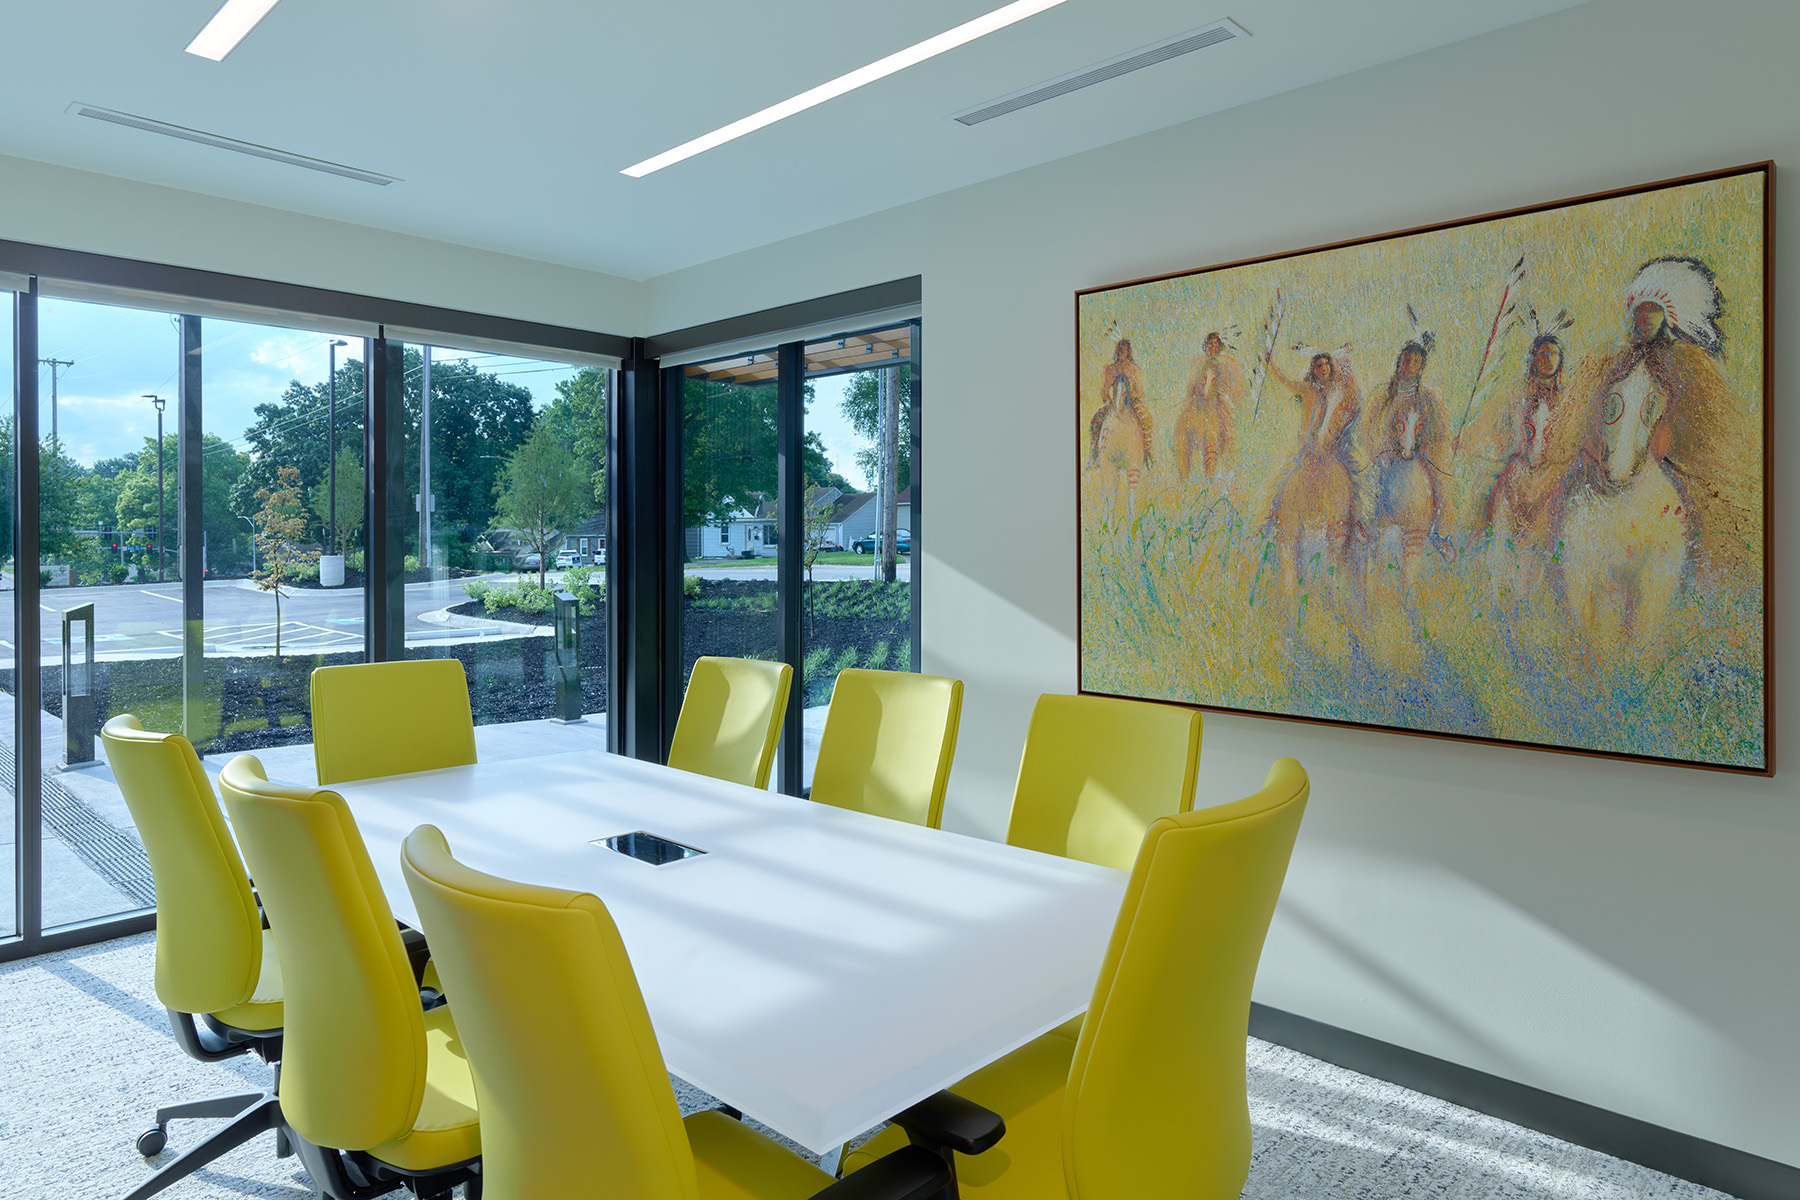 Conference rooms with linear recessed lights can be configured for training, meeting and mock-trial scenarios.